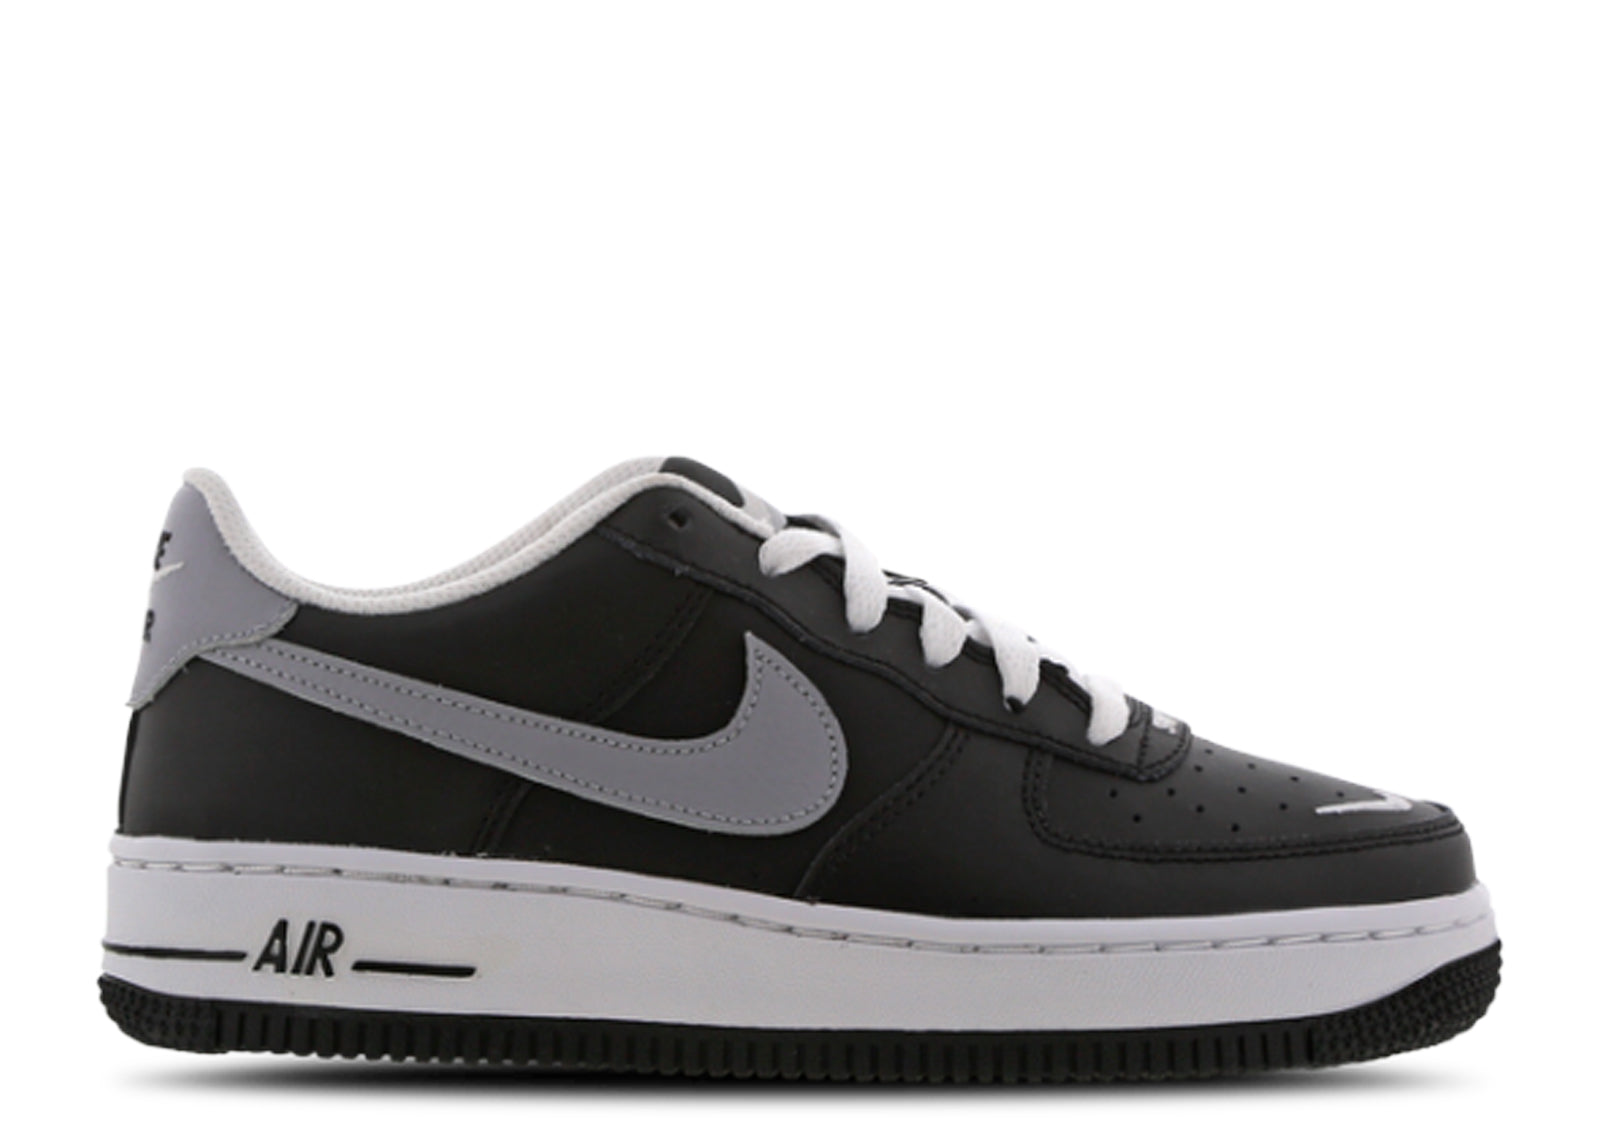 Second Chance - Multi Nike Air Force 1 Black Sport GS - 37,5 | NEW